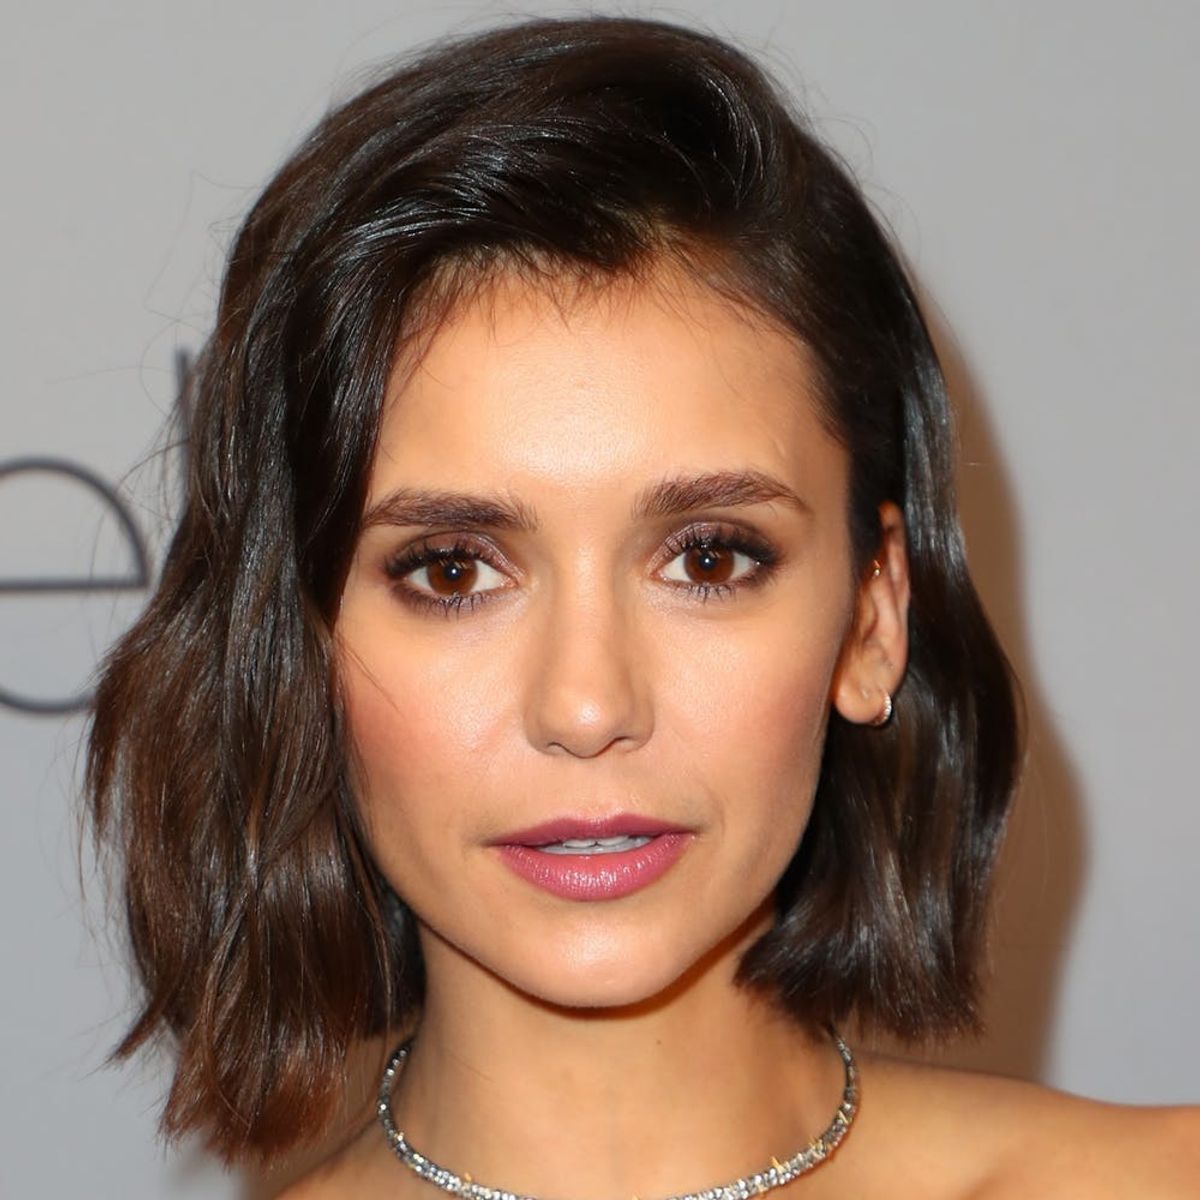 Nina Dobrev Is COMPLETELY Unrecognizable With a Short Blonde Wig and Wrinkles